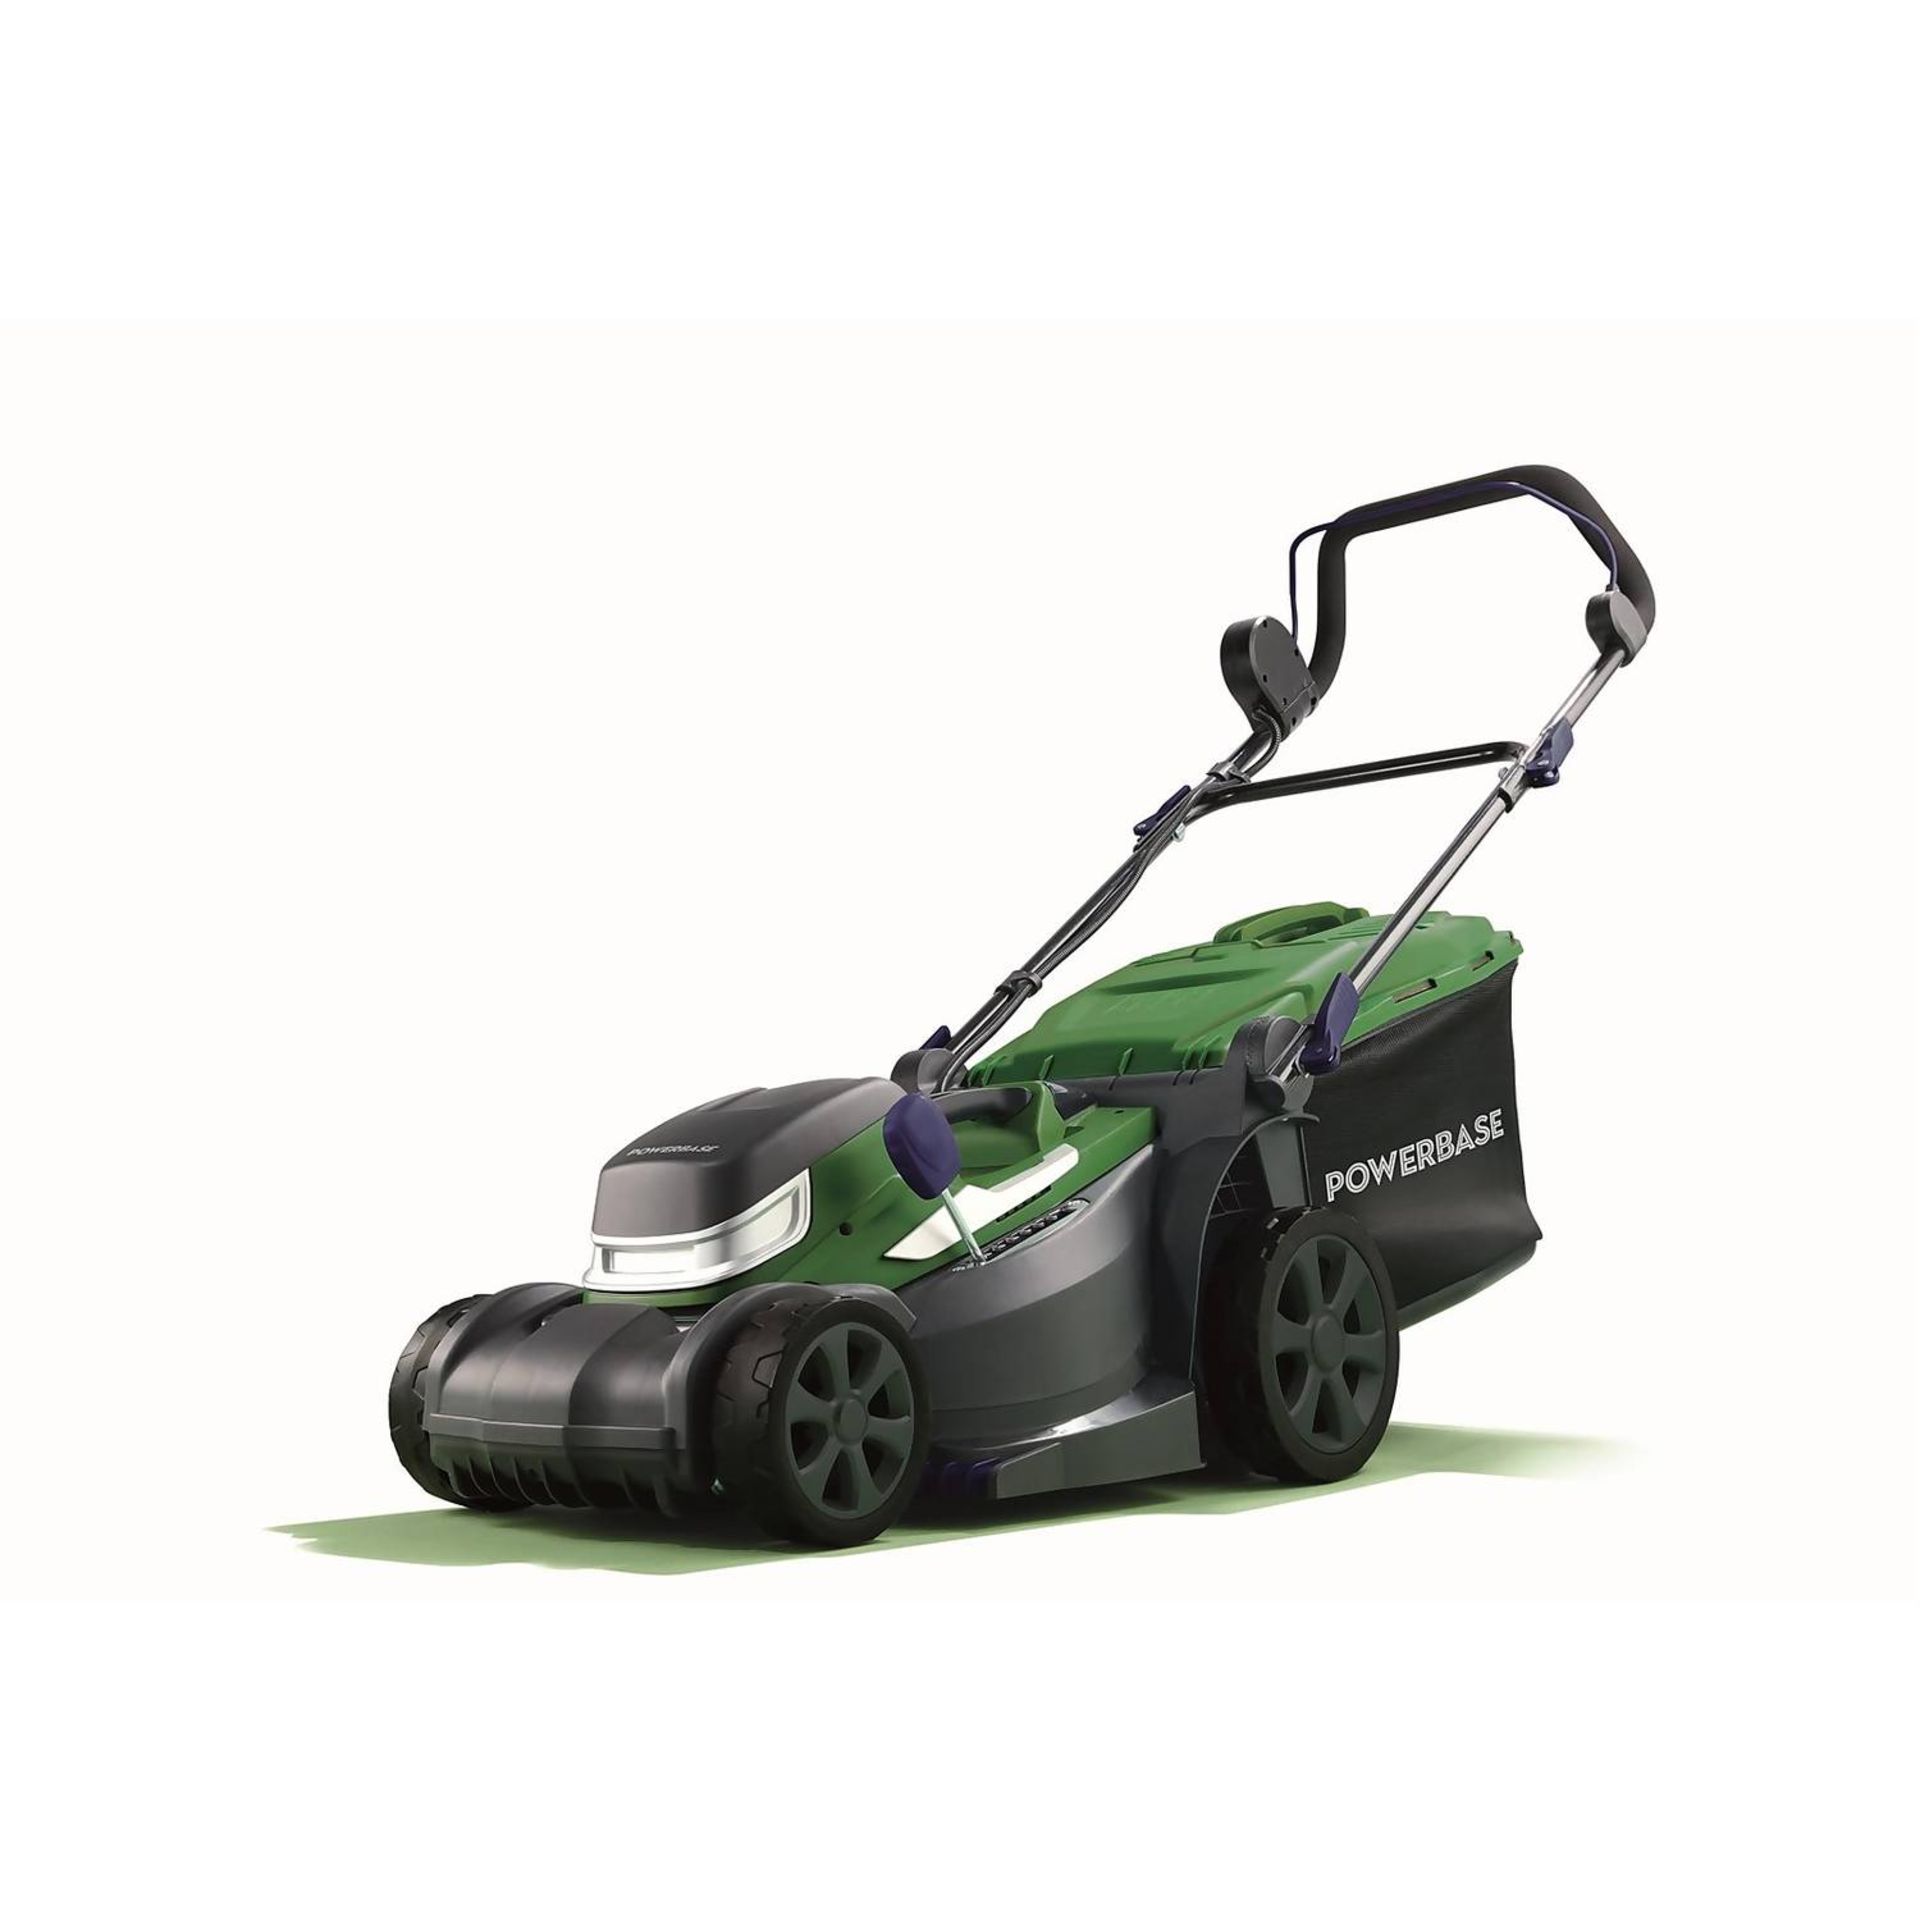 (R14G) 3x Items. 1x Qualcast 39cm 36V Cordless Rotary Lawn Mower (With Battery & Charger). 1x Qualc - Image 3 of 4